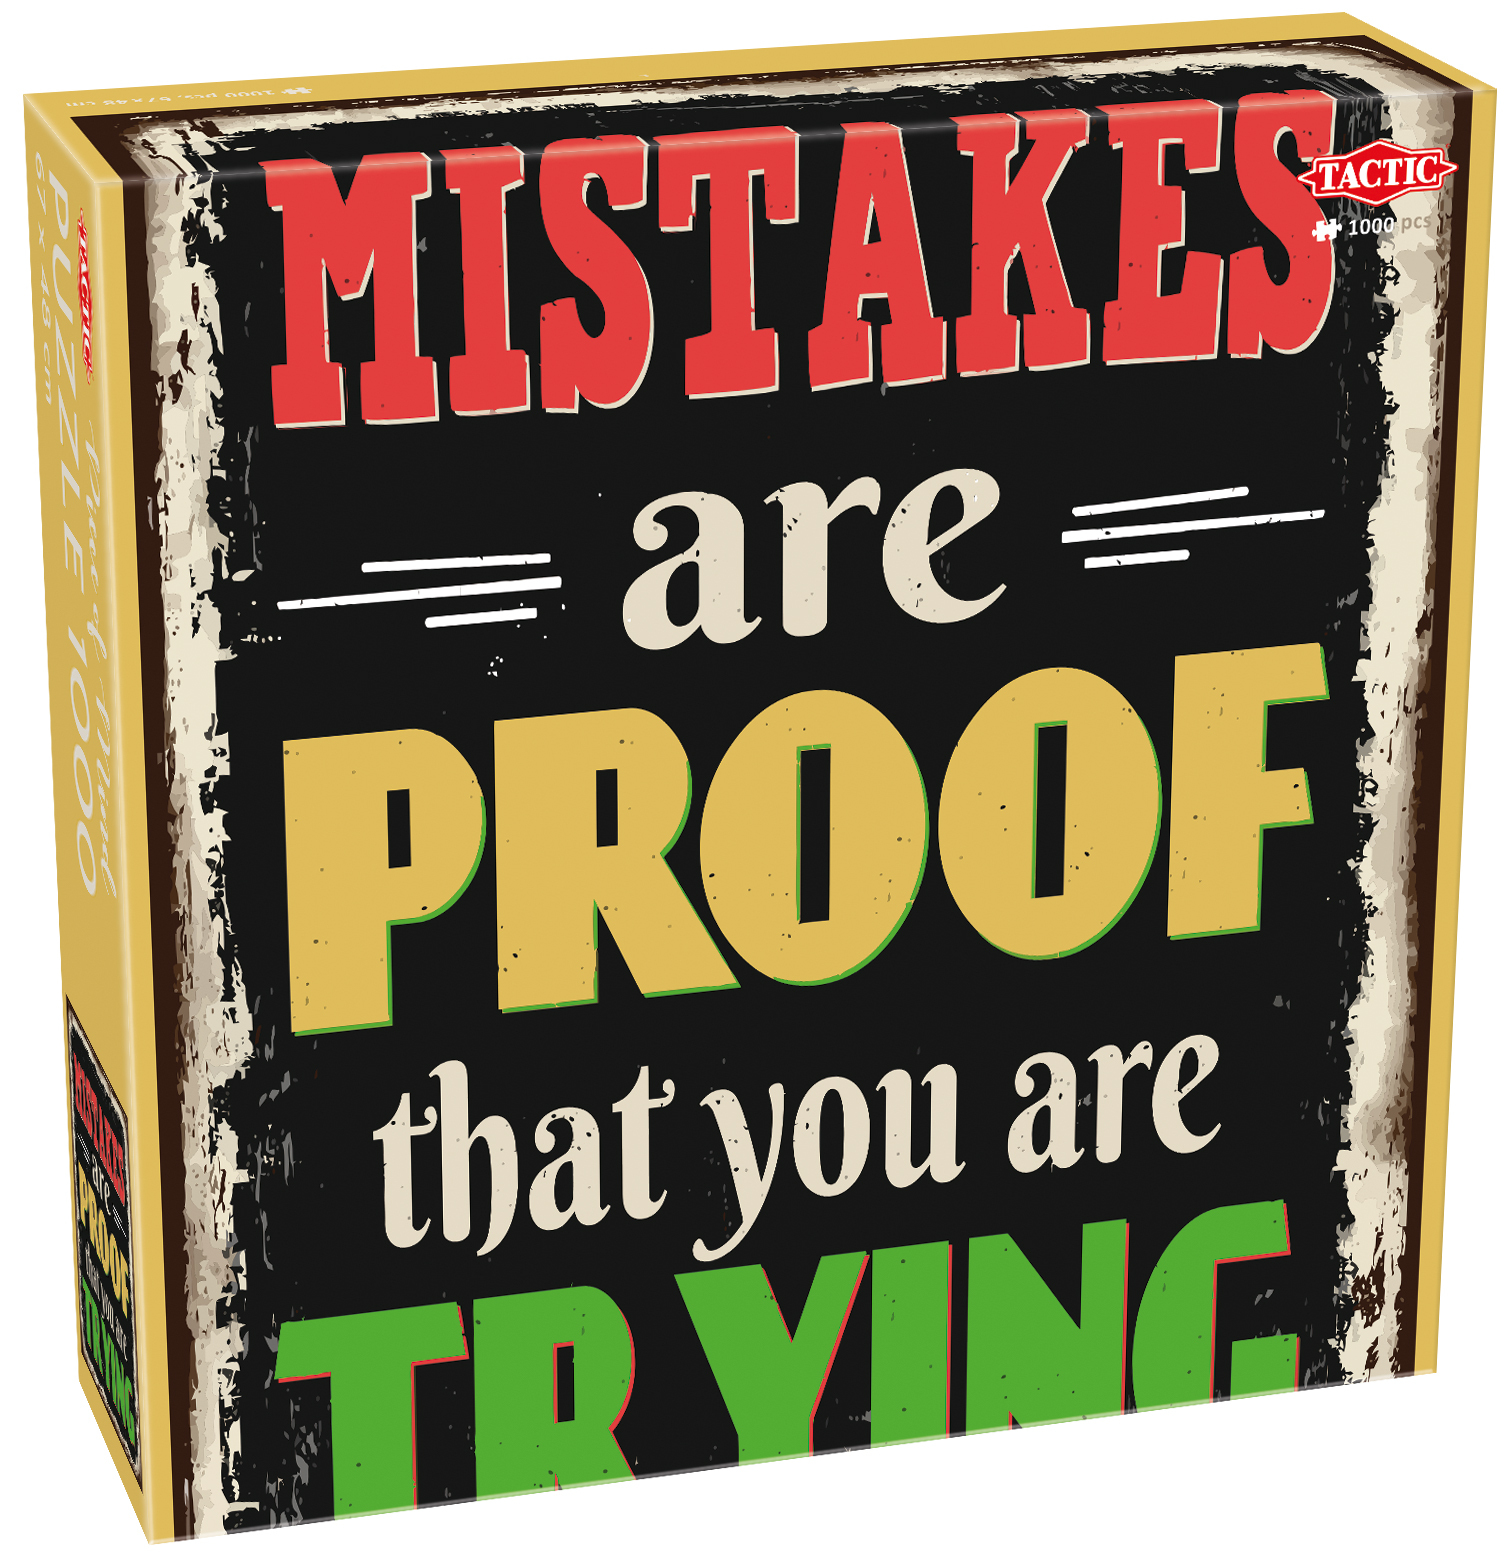 Tactic Mistakes Proof of Trying 1000pcs